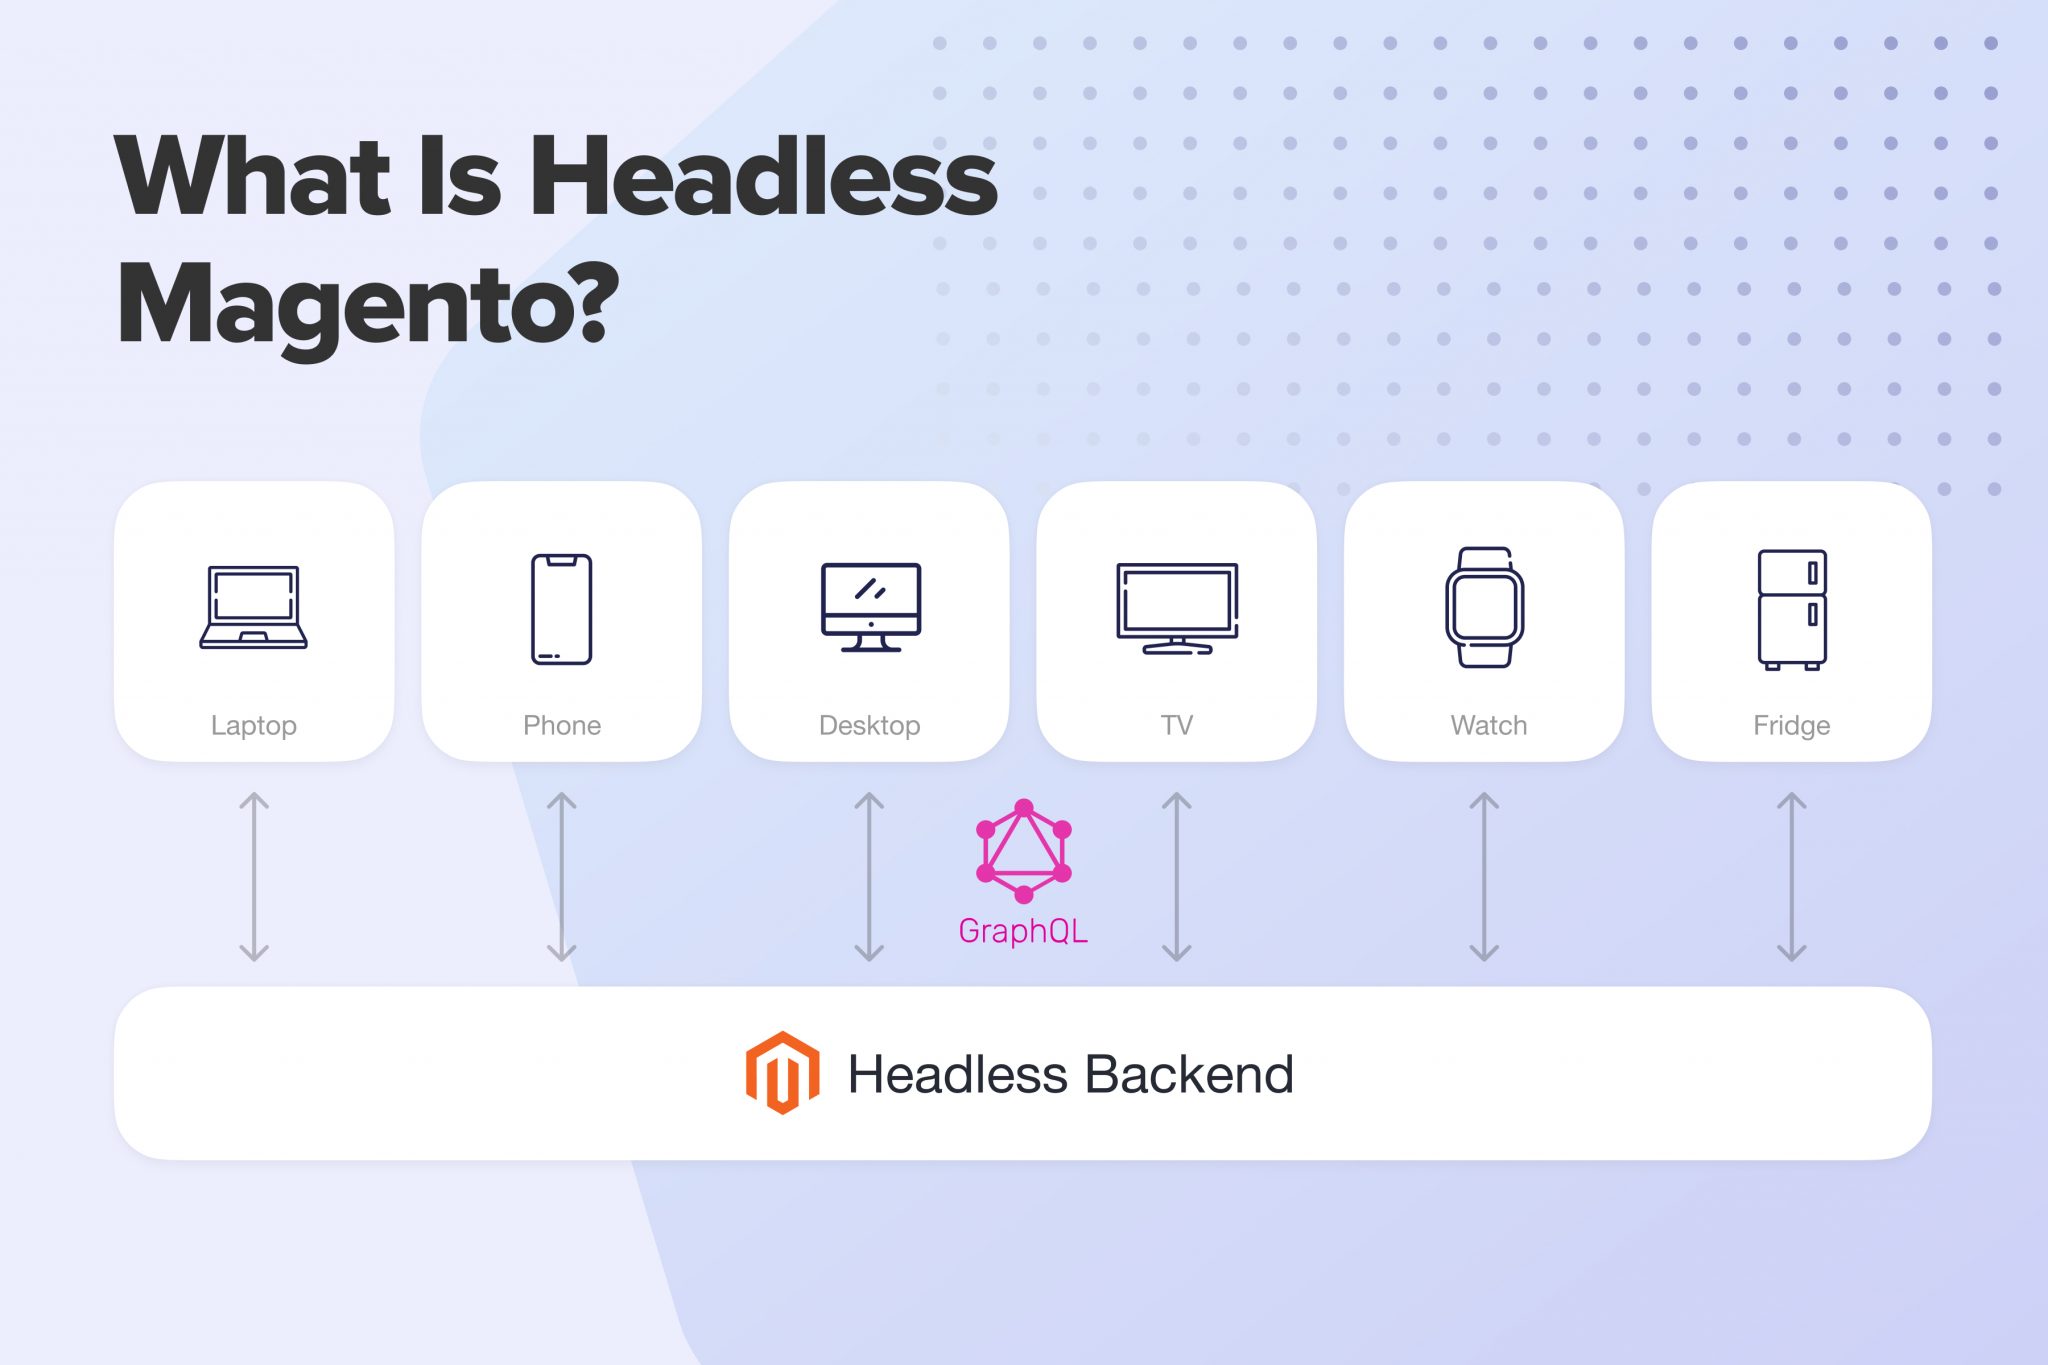 What Is Headless Magento?